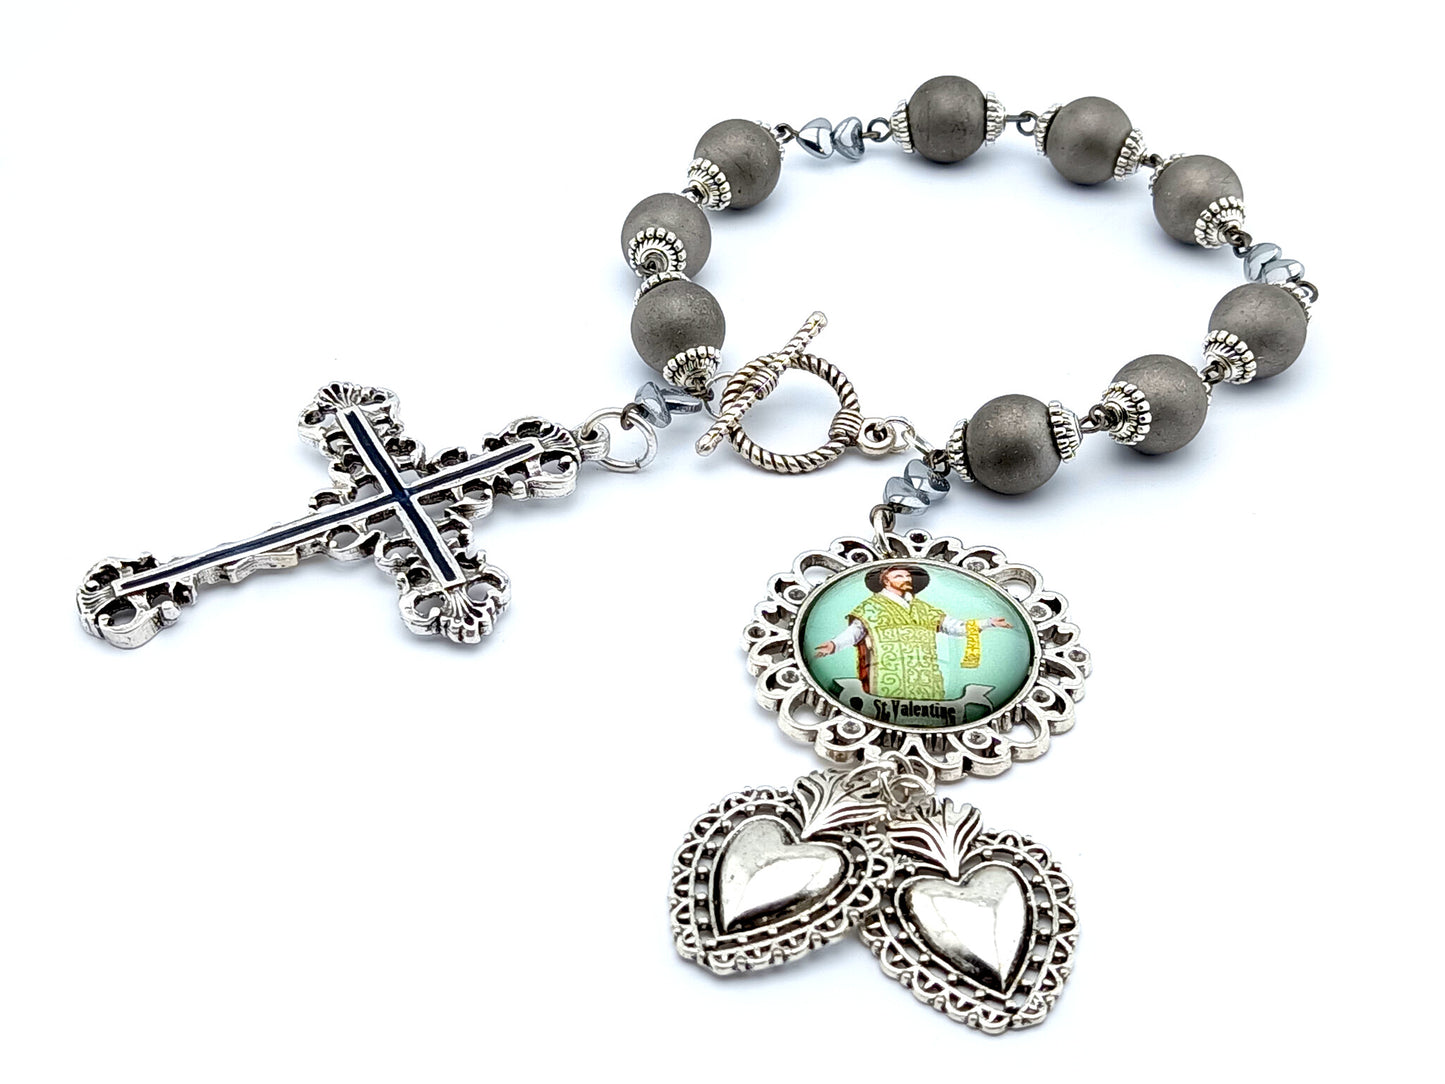 Saint Valentine unique rosary beads prayer chaplet with silver glass beads, silver cross, picture medal and two hearts medals.